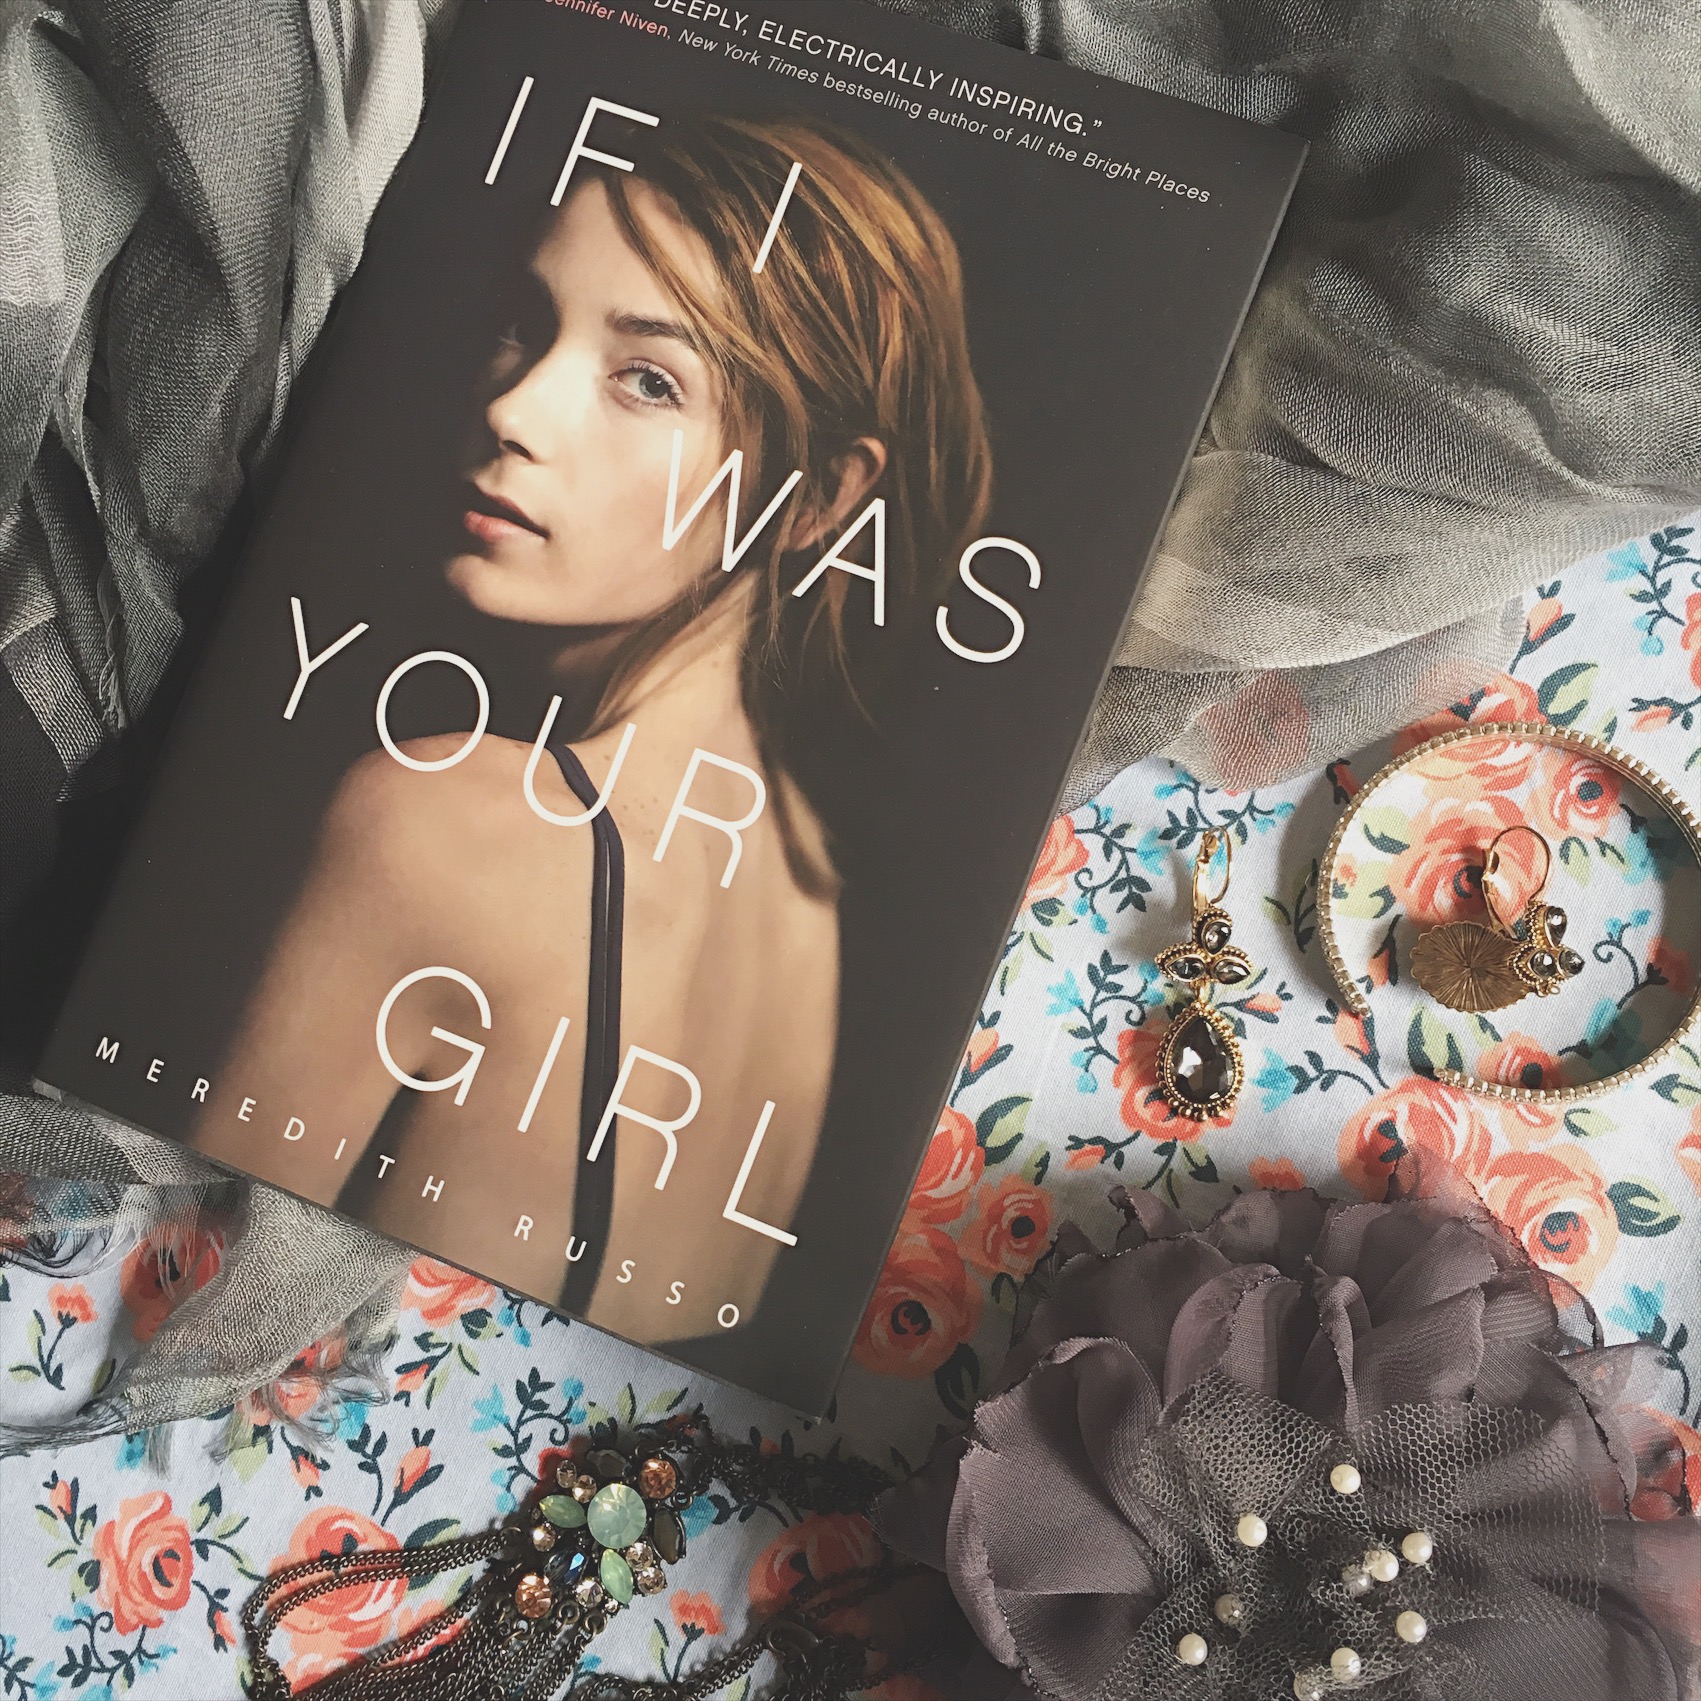 The transgender author behind ‘If I Was Your Girl’ talks words, boxes and intersectionality.